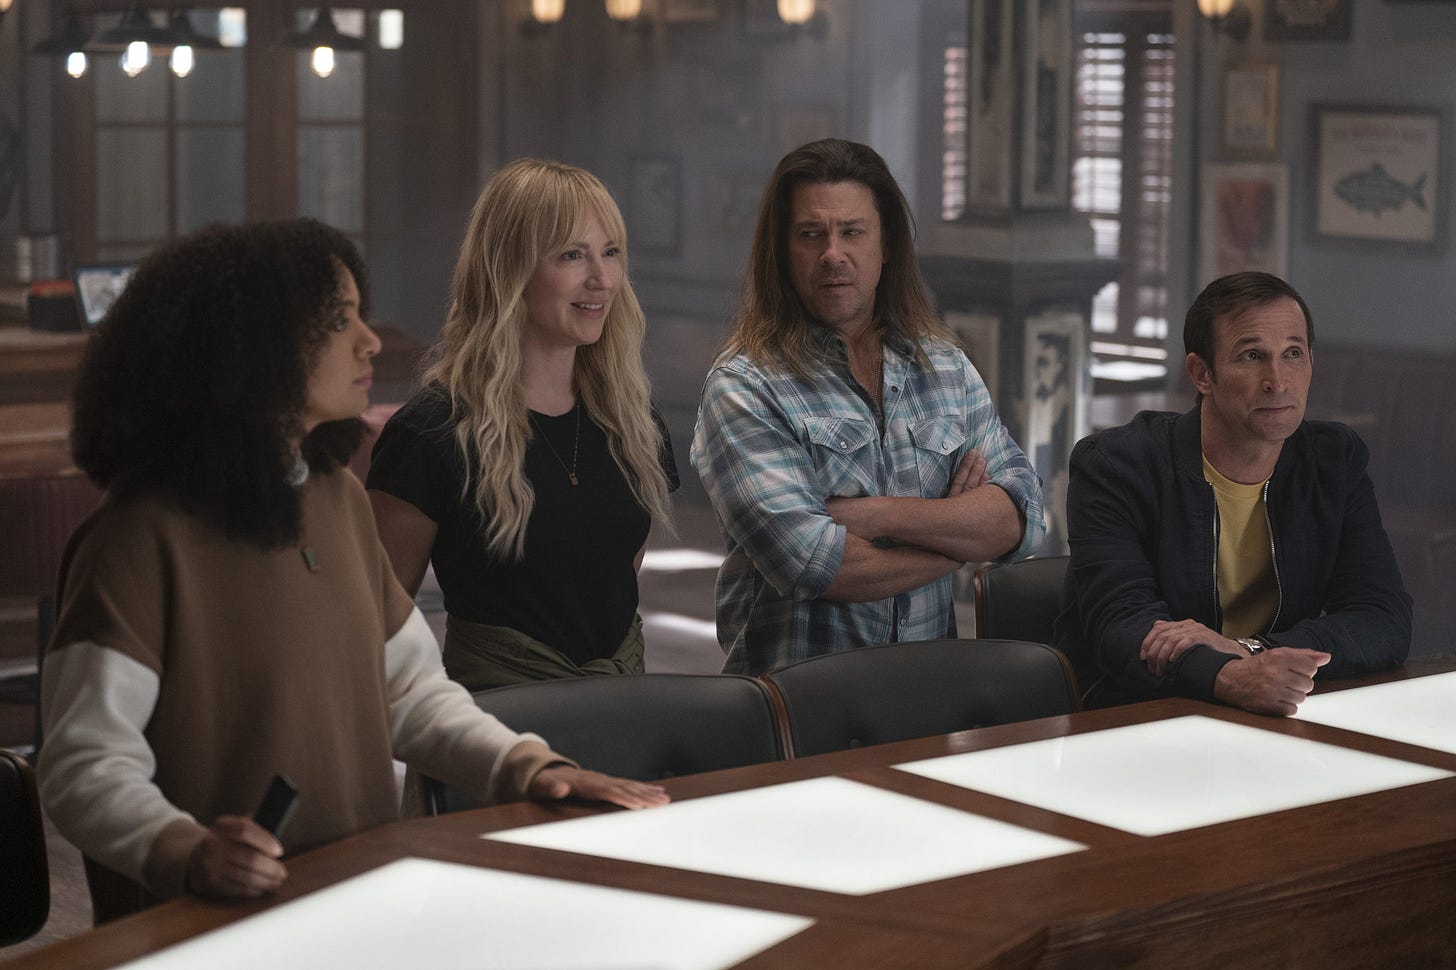 Scene from LEVERAGE: REDEMPTION featuring Aleyse Shannon, Beth Riesgraf, Christian Kane, and Noah Wyle.